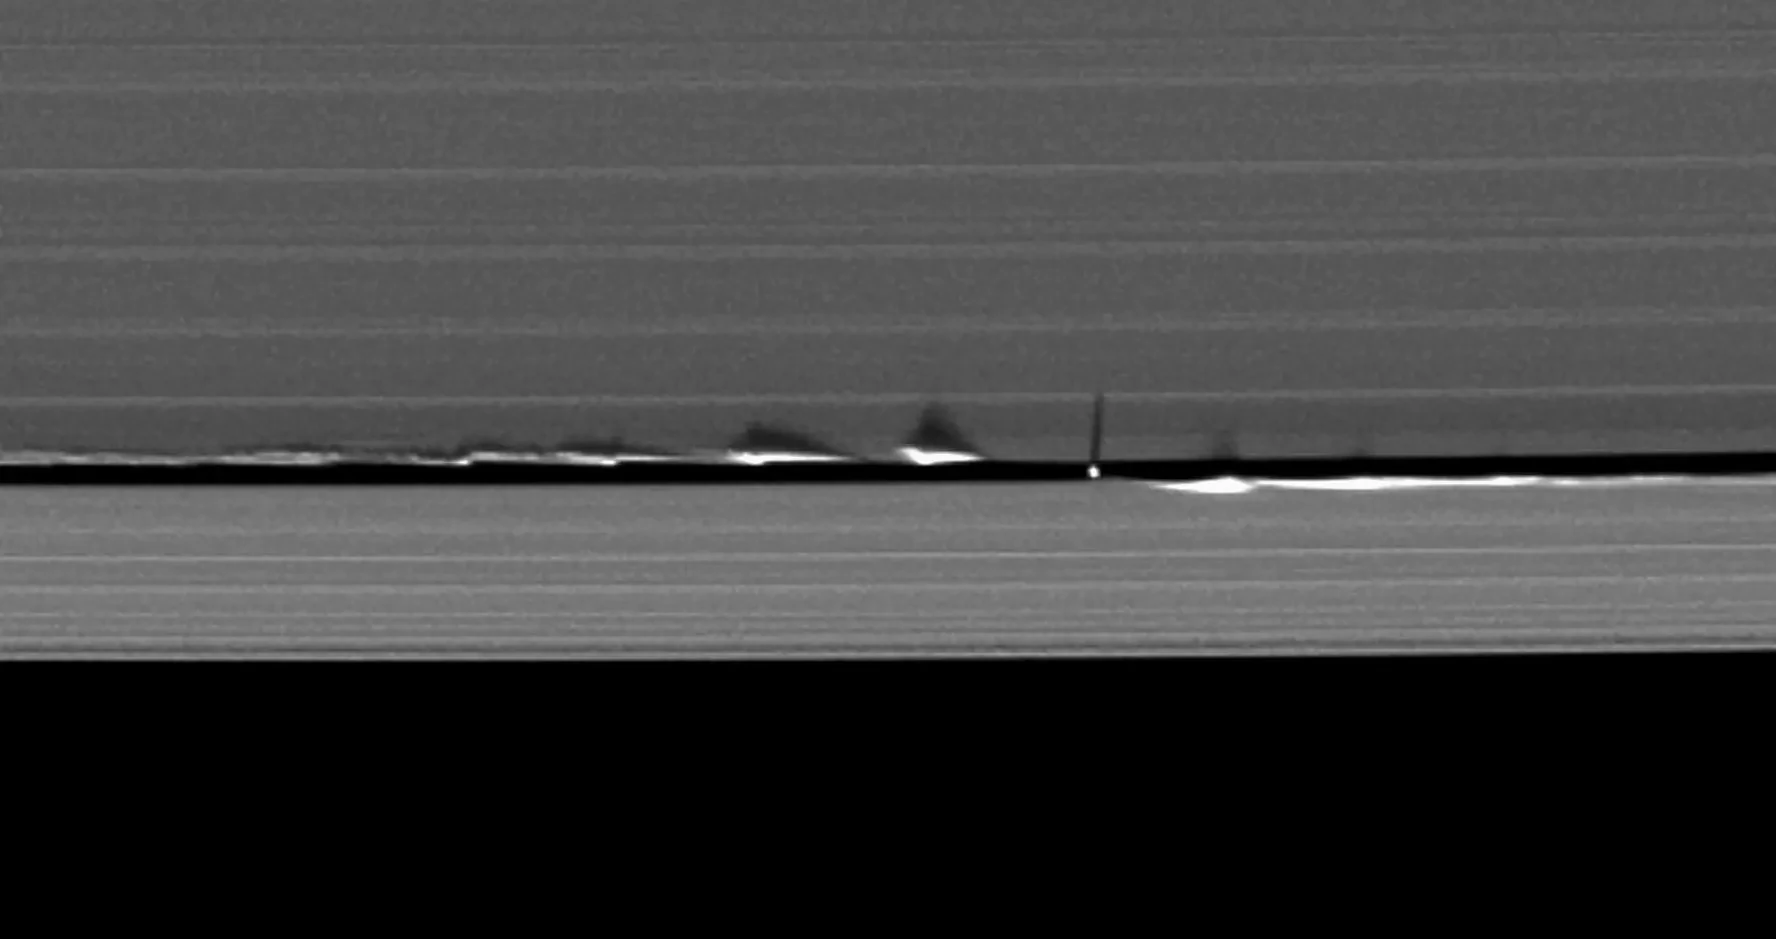 The bottom third of the image is filled with darkness. The top two thirds show the rings of saturn, forming patterned density waves vertically. In the center of the image there is a gap in the rings, and the moon Daphnis can be seen sweeping out a path. Both in front of and behind the moon, waves of ring dust are being created in a plane perpendicular to the camera and the rest of the ring structures.